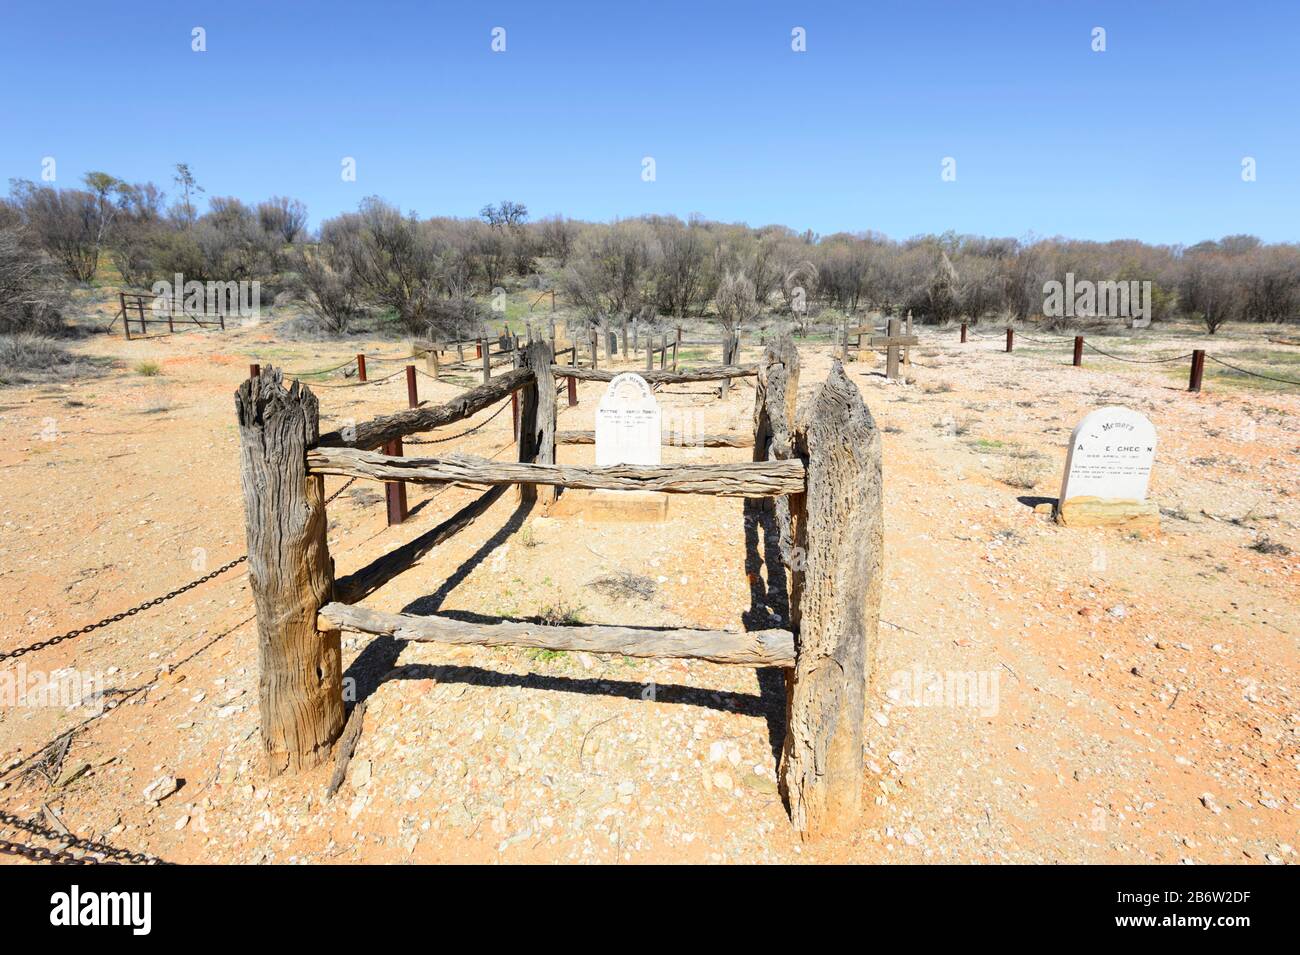 Goldminers' graves, White Range Cemetery, Arltunga Historical Reserve, a deserted gold rush ghost town near Alice Springs, Northern Territory, NT, Aus Stock Photo